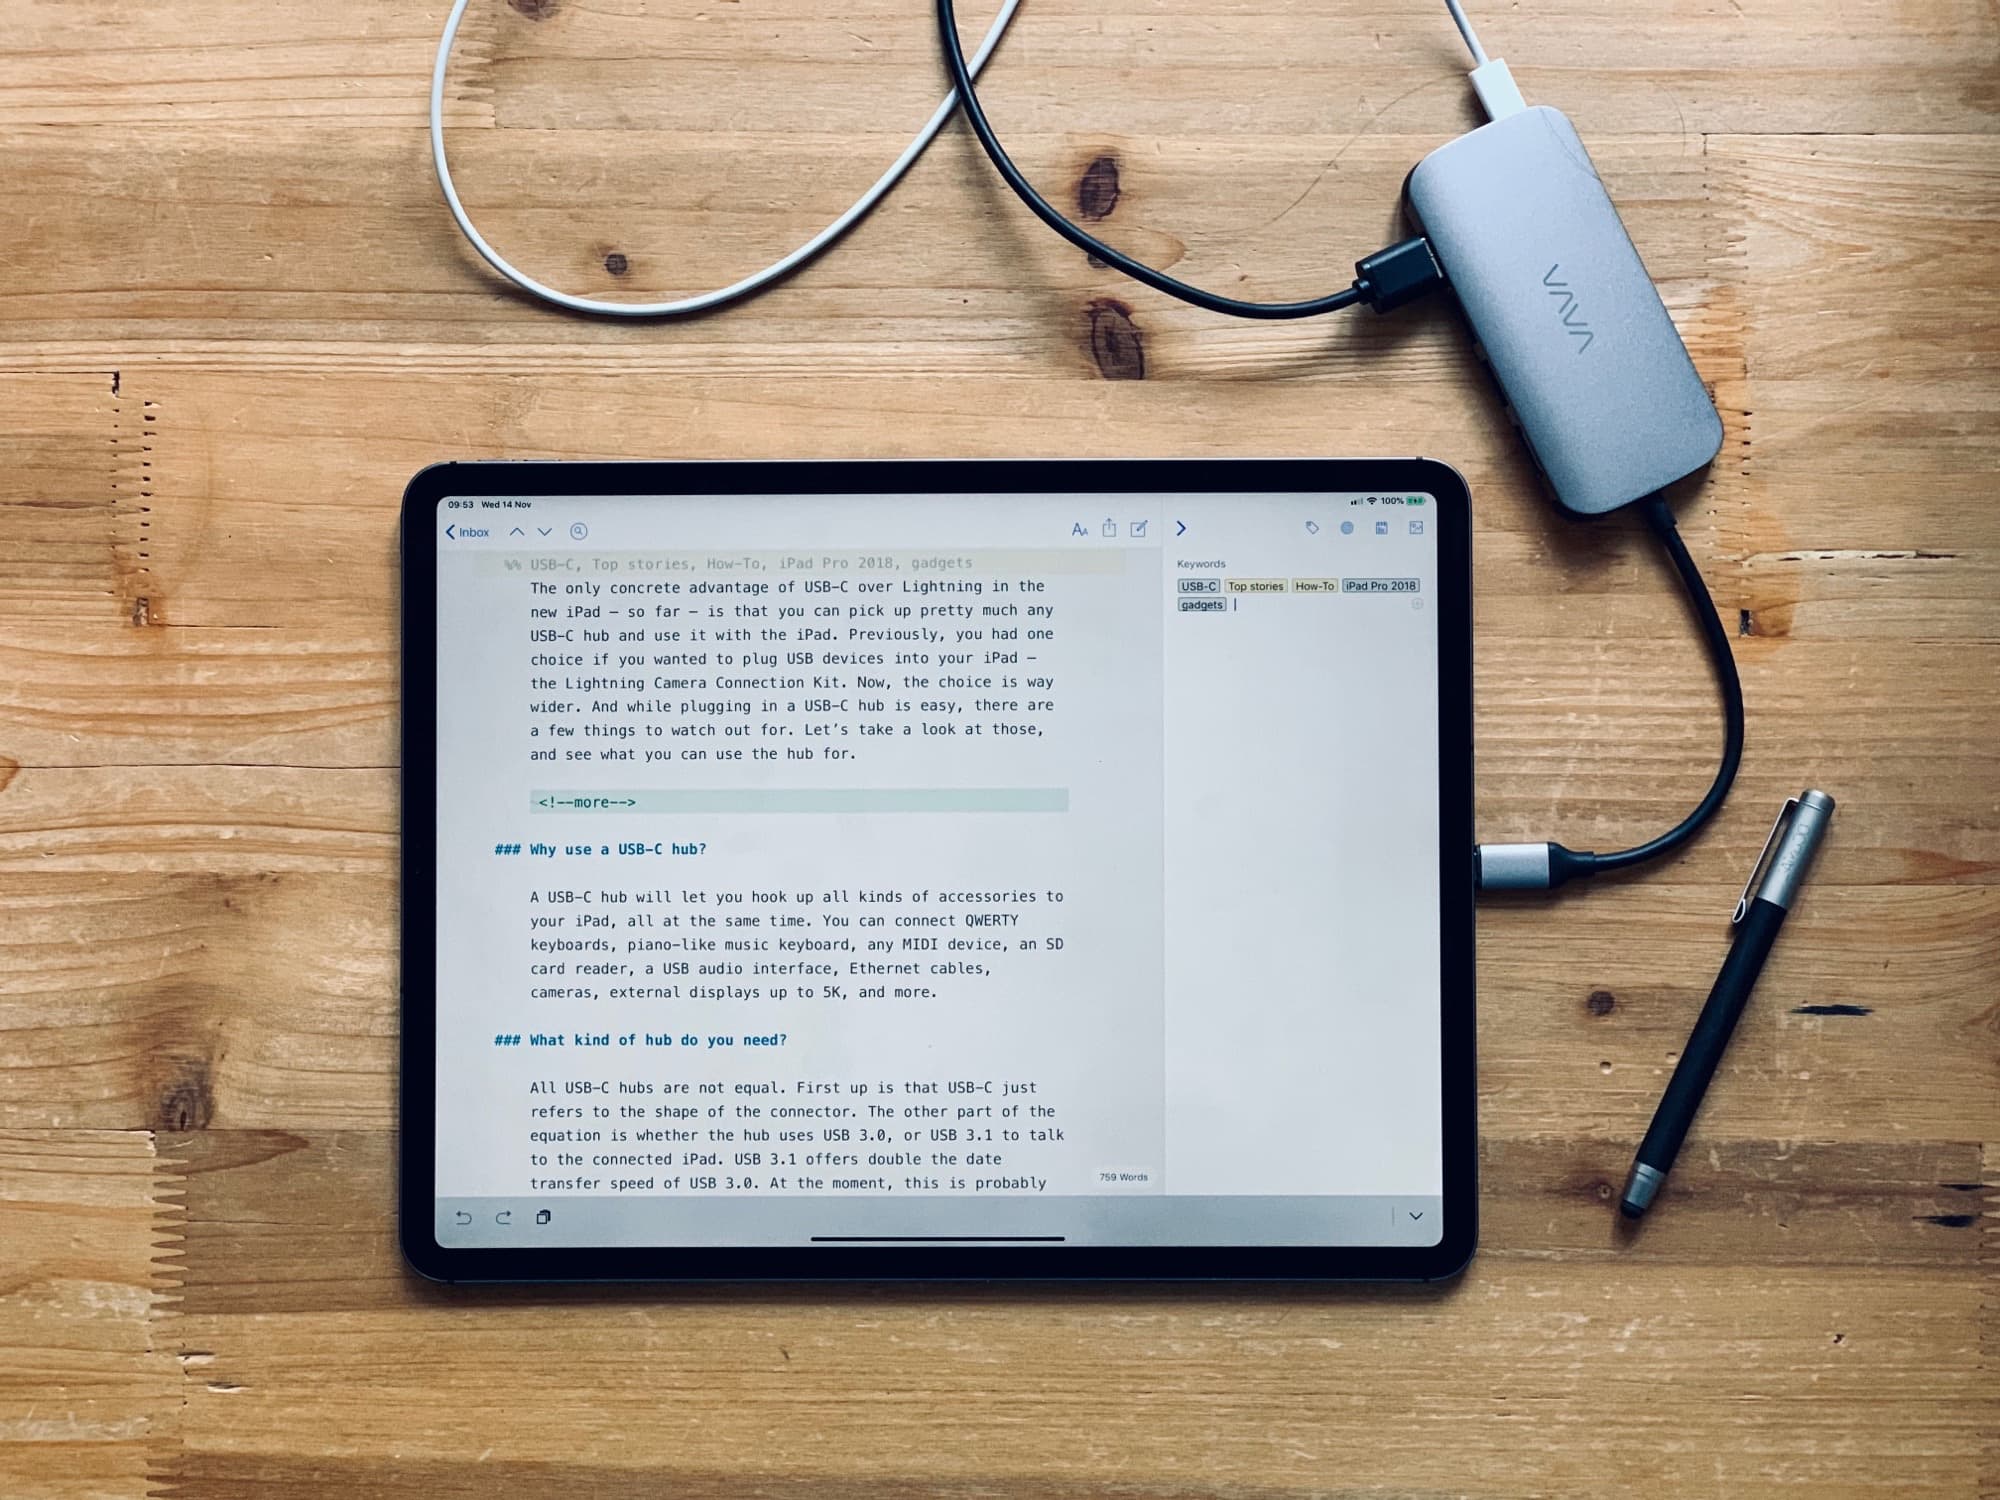 Vanding Seks Cornwall How to use a USB-C hub with 2018 iPad Pro | Cult of Mac